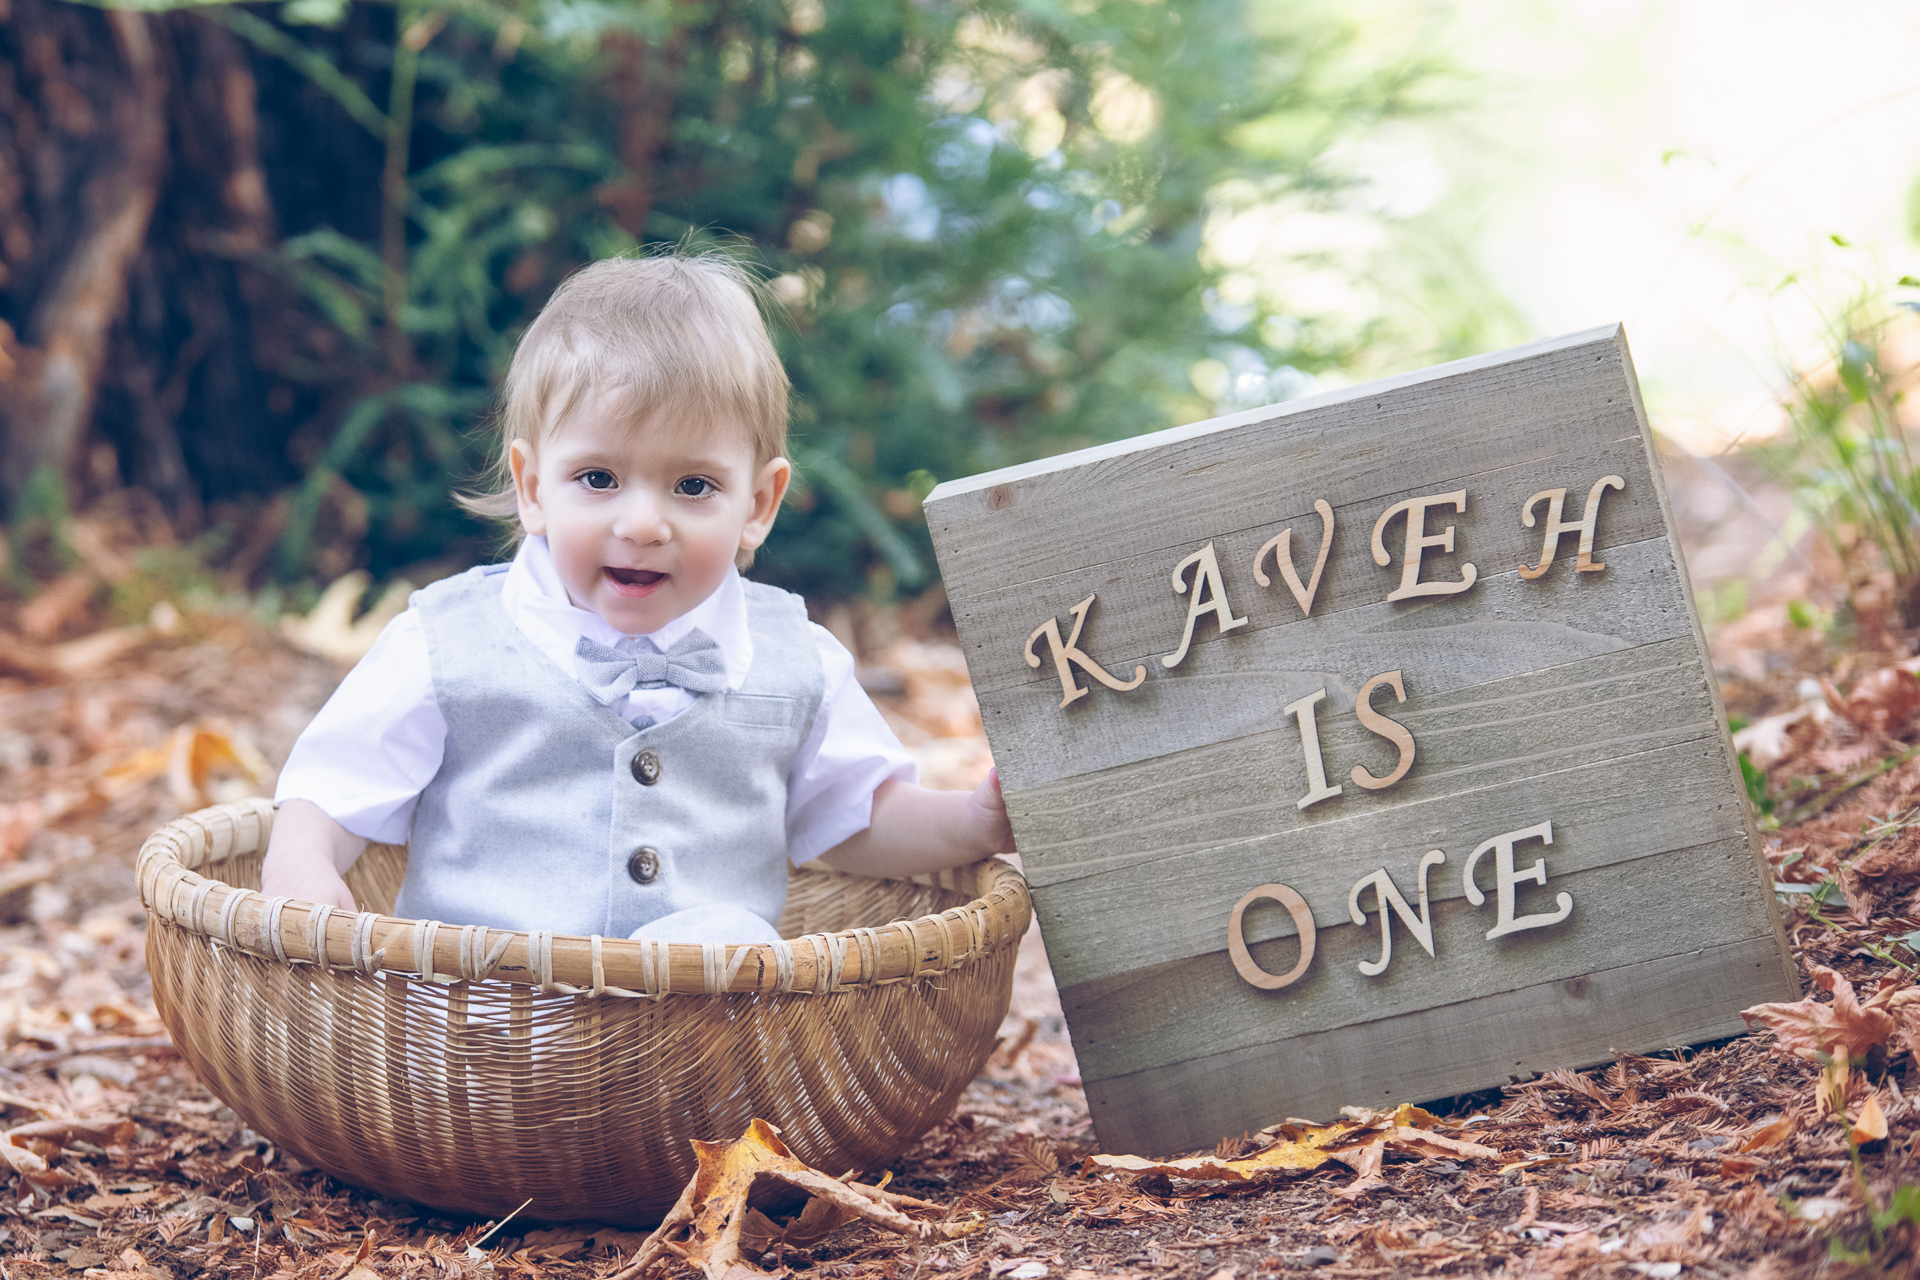 Baby boy sitting on prop outdoors during fall season holds a sign that says "Kaveh is one"